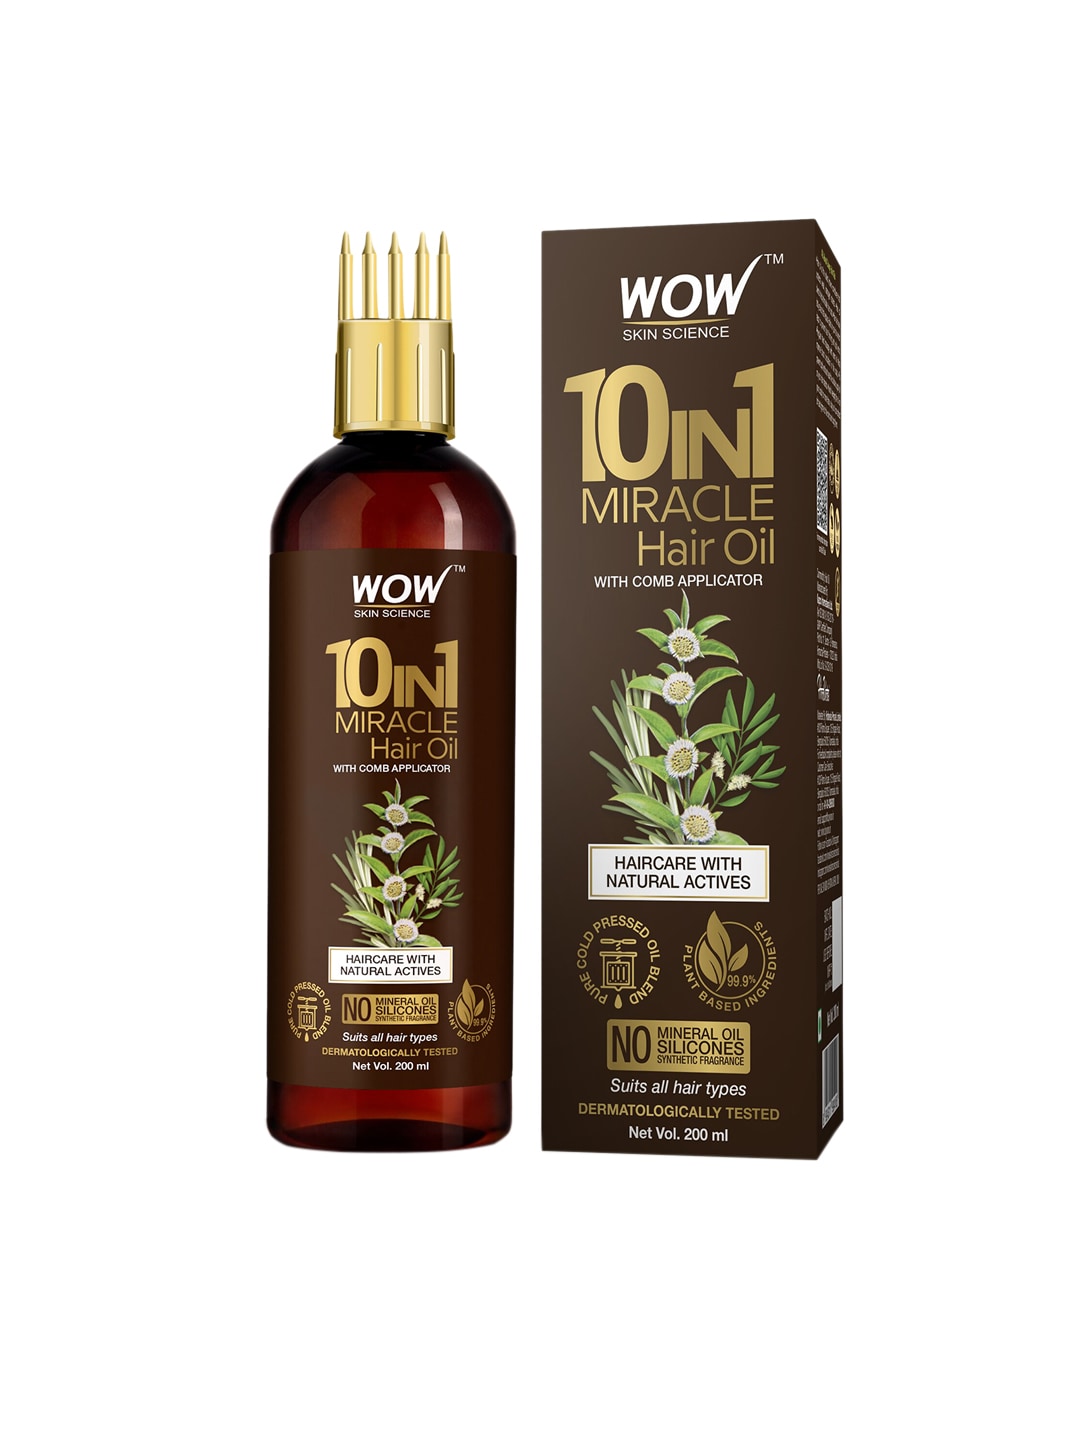 WOW SKIN SCIENCE 10 in 1 Miracle Hair Oil with Comb Applicator - 200 ml Price in India